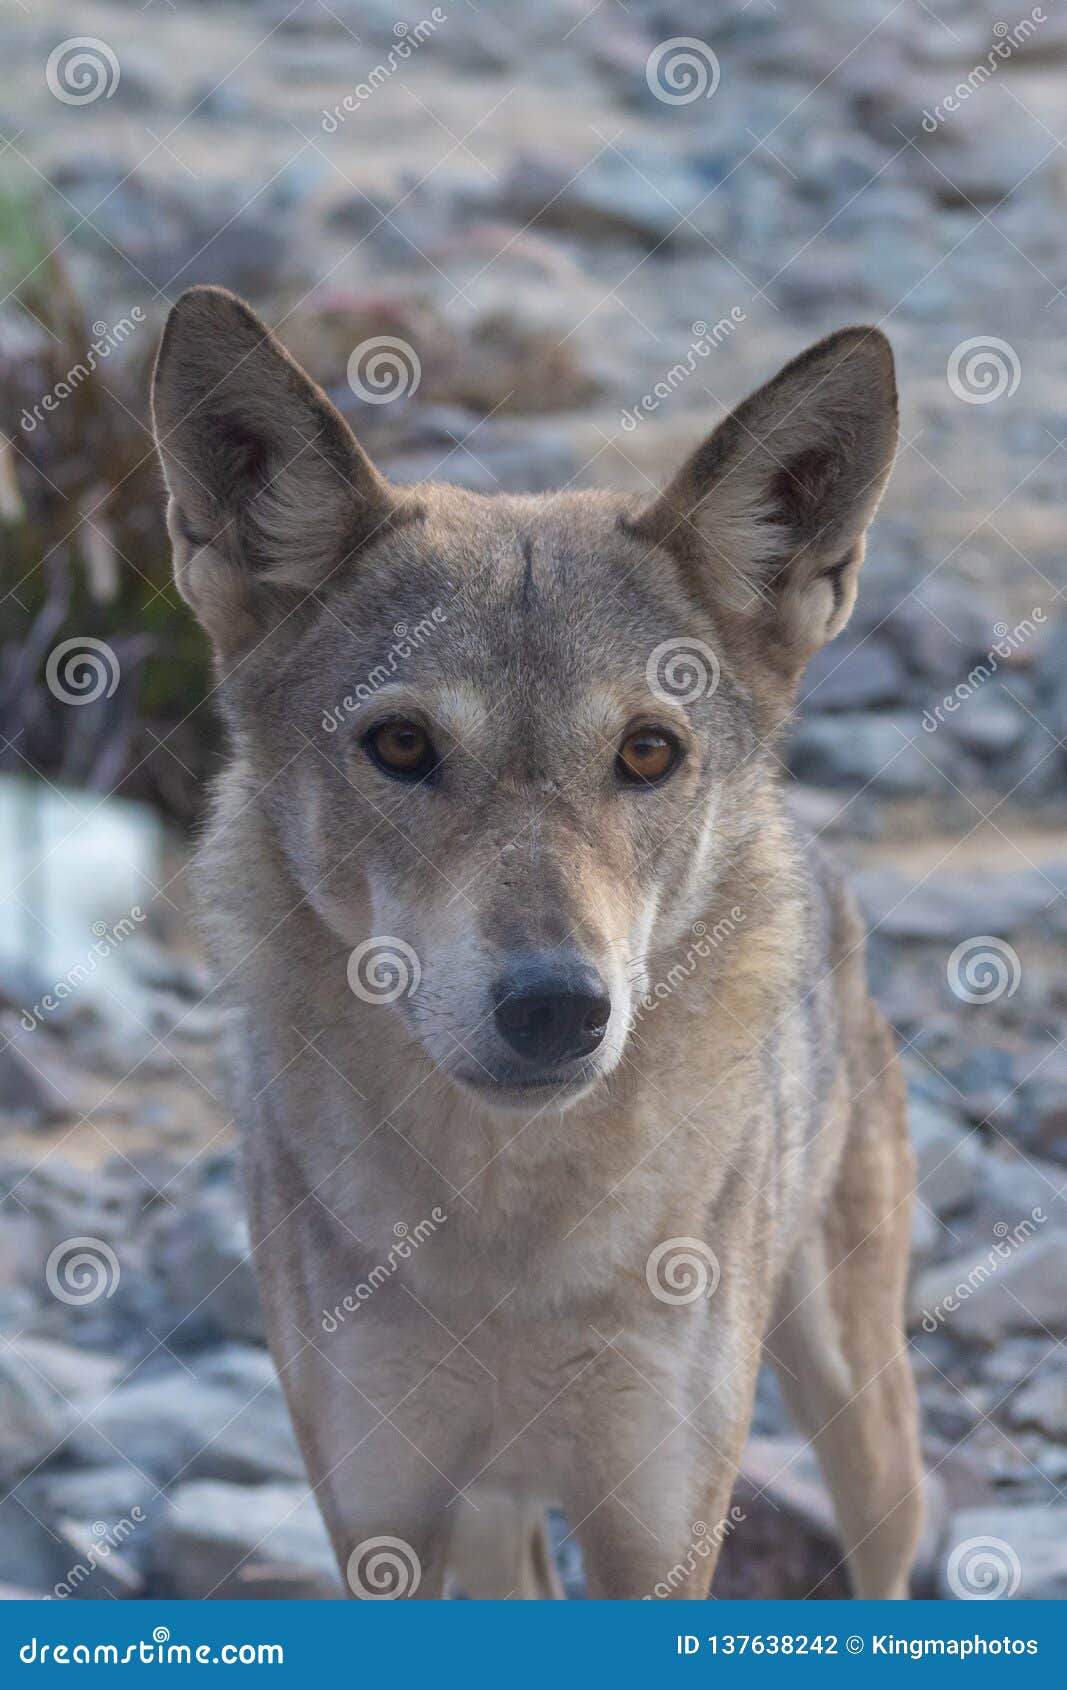 a rare and endangered arabian wolf, a subspecies of the grey wolf, stops and stares in the desert landscape.